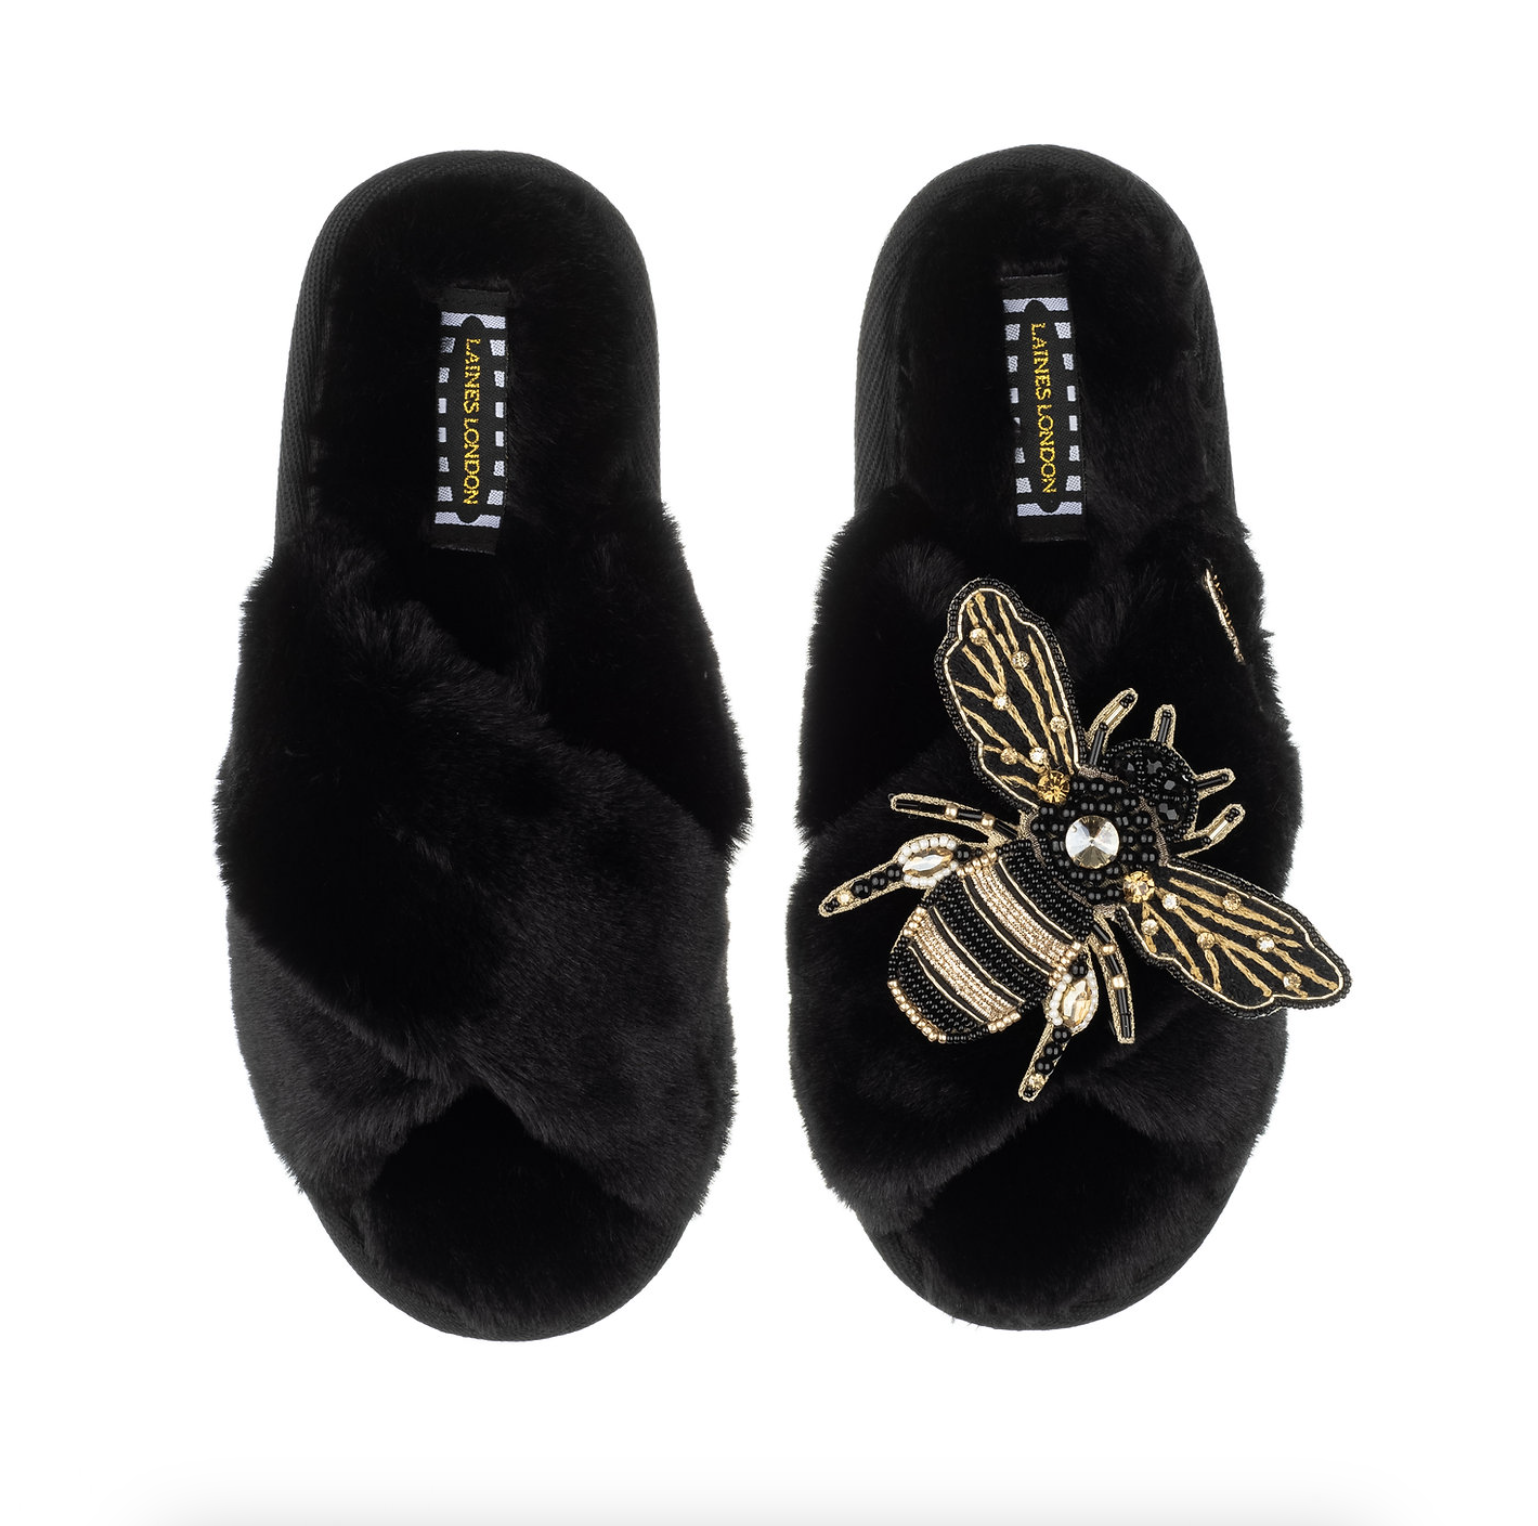 Laines London Classic Slipper With Honeybee Brooch - Black